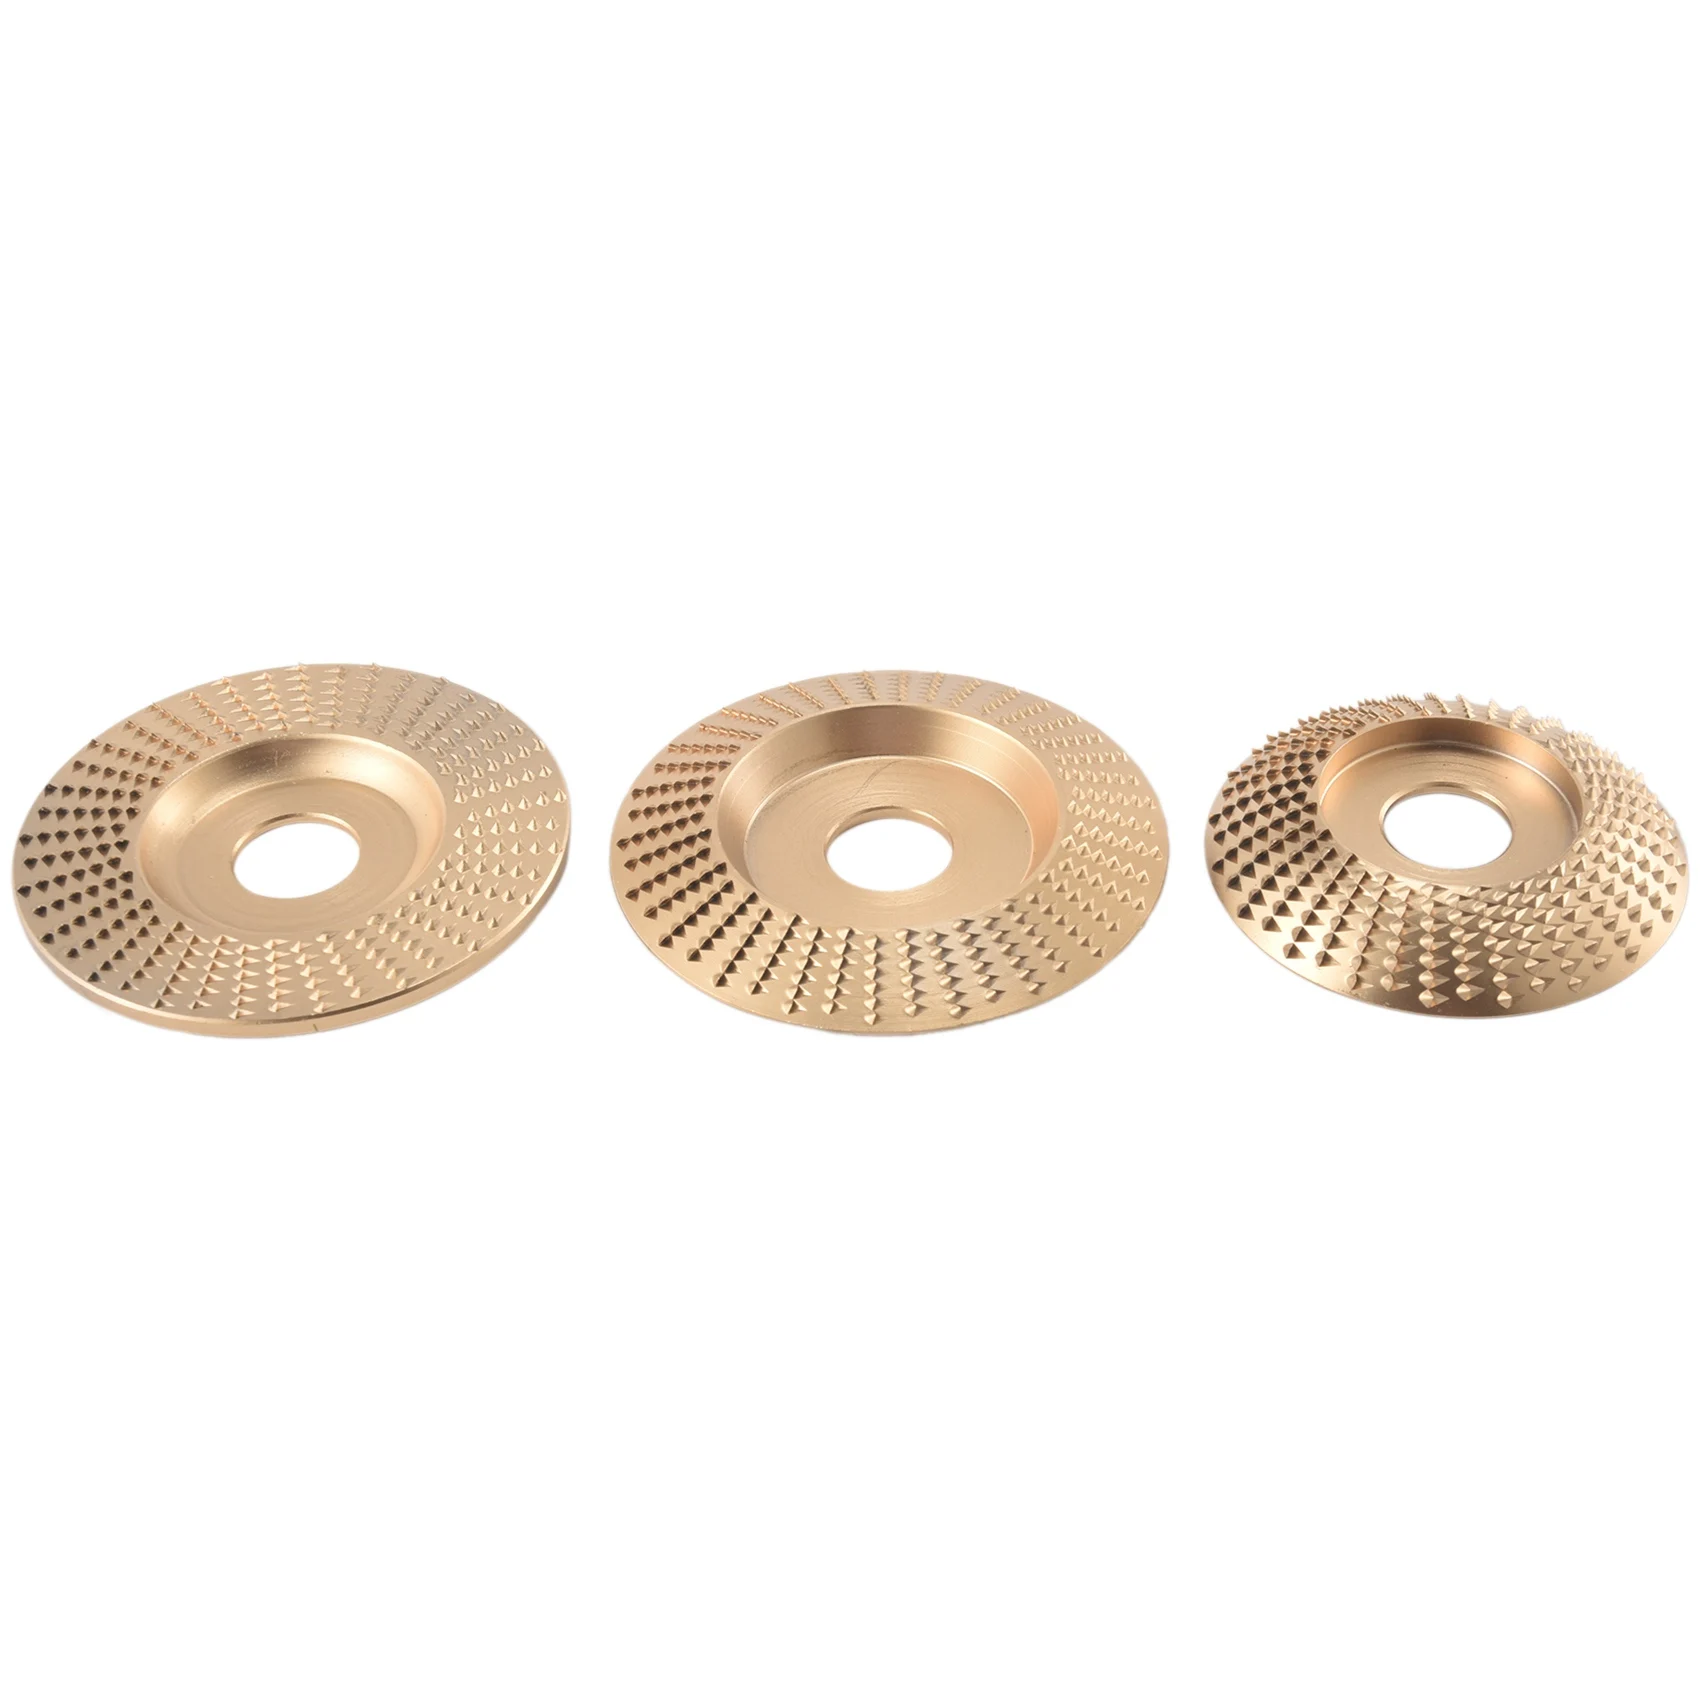 

3Pcs Wood Grinding Wheel Rotary Disc Sanding Woodworking Carving Abrasive Disc Tools for Angle Grinder Bore 22mm